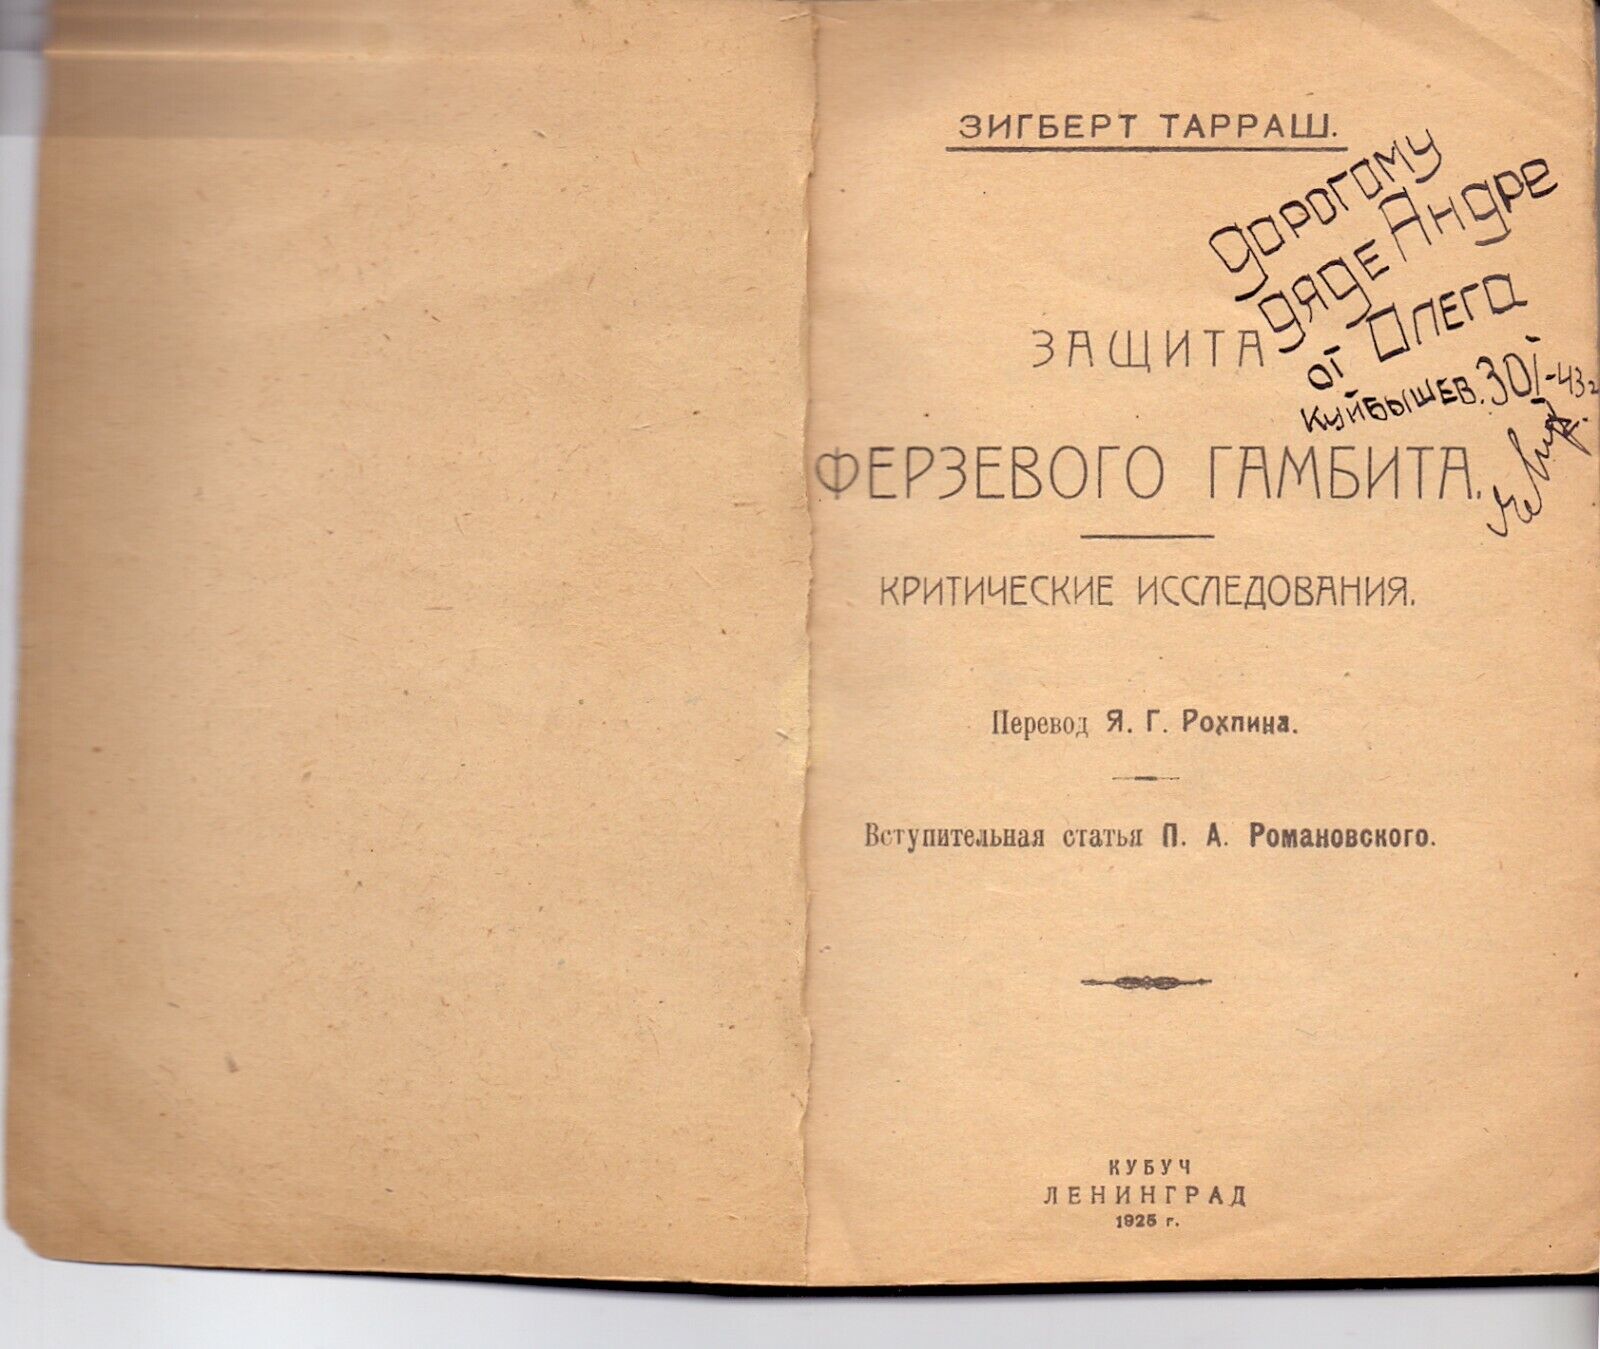 11539.Russian chess book: S. Tarrasch. 1925.Protection of the Queen's gambit